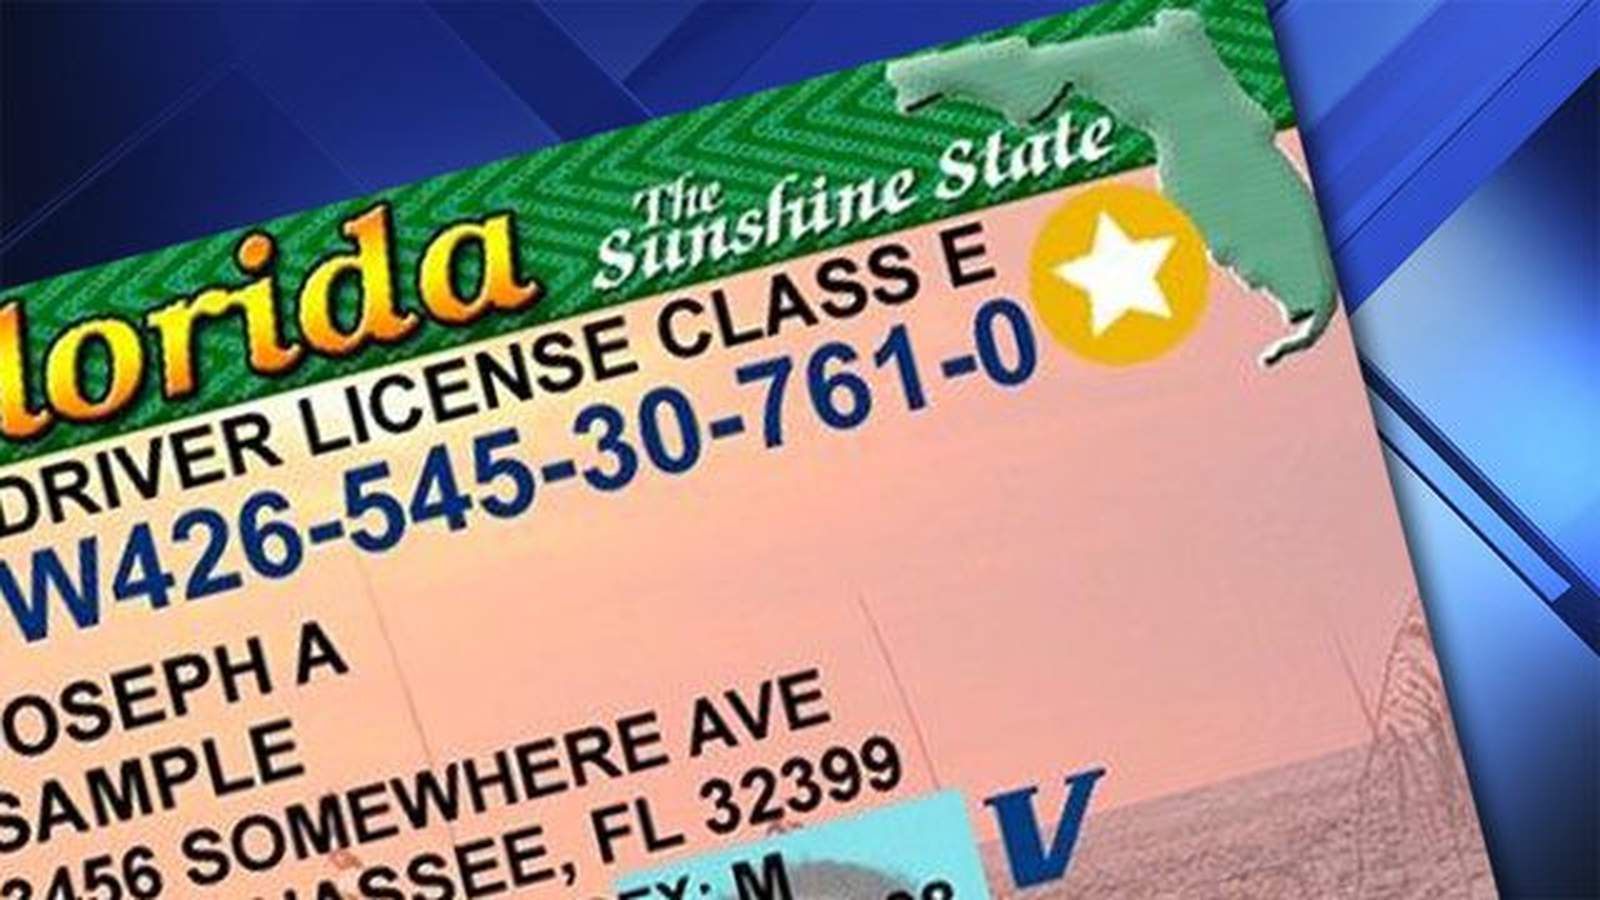 Here’s how to fix an error on your driving record in Florida